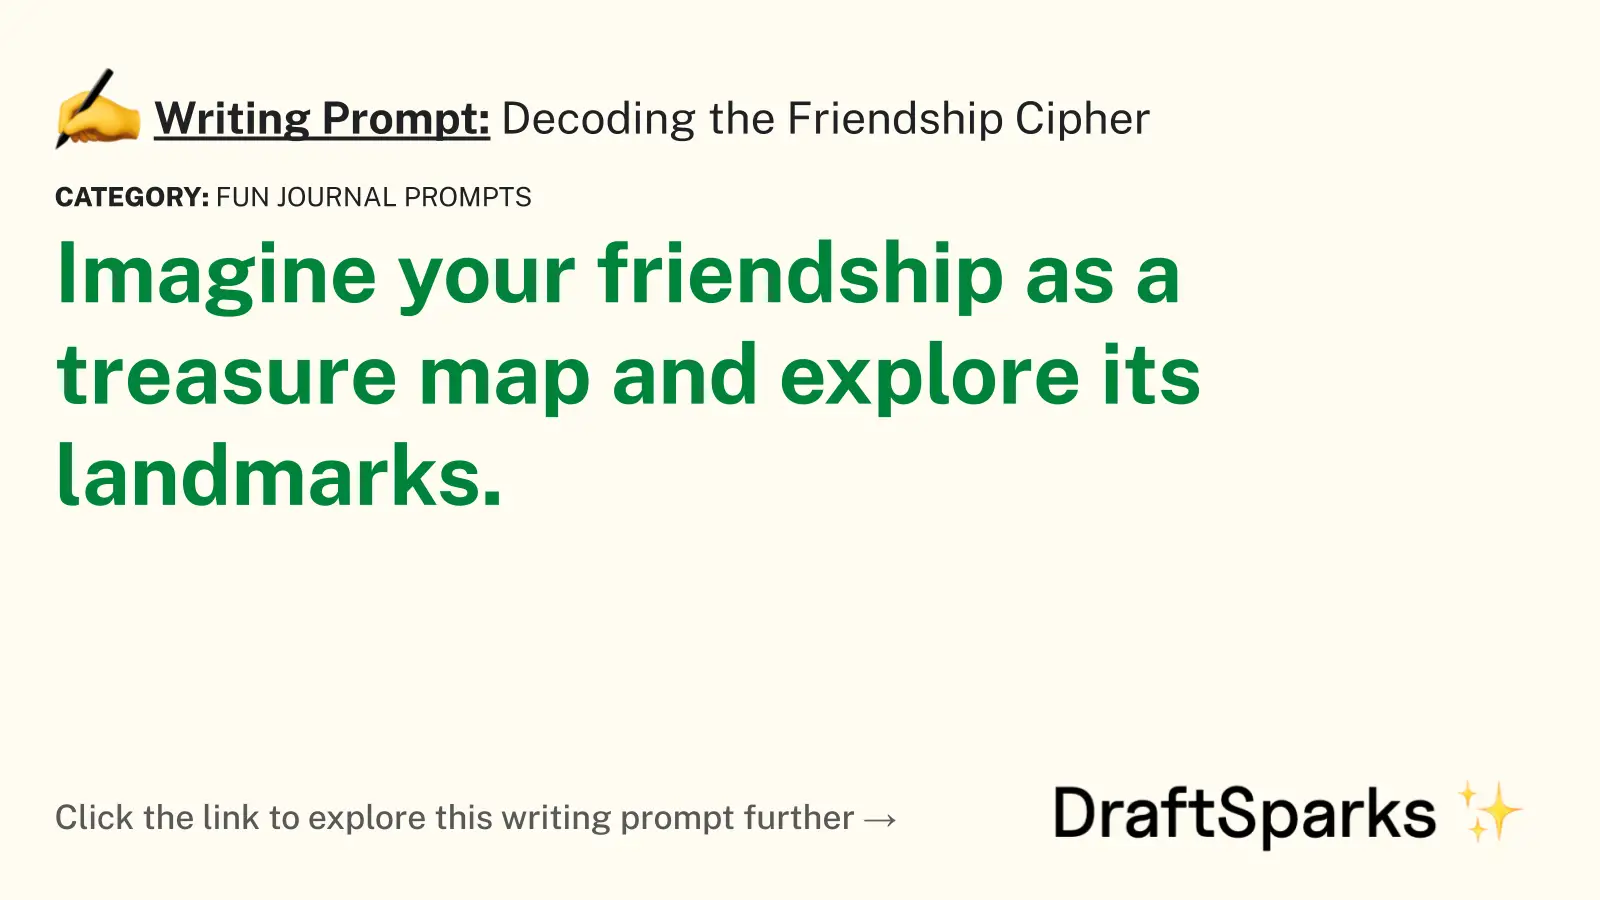 Decoding the Friendship Cipher